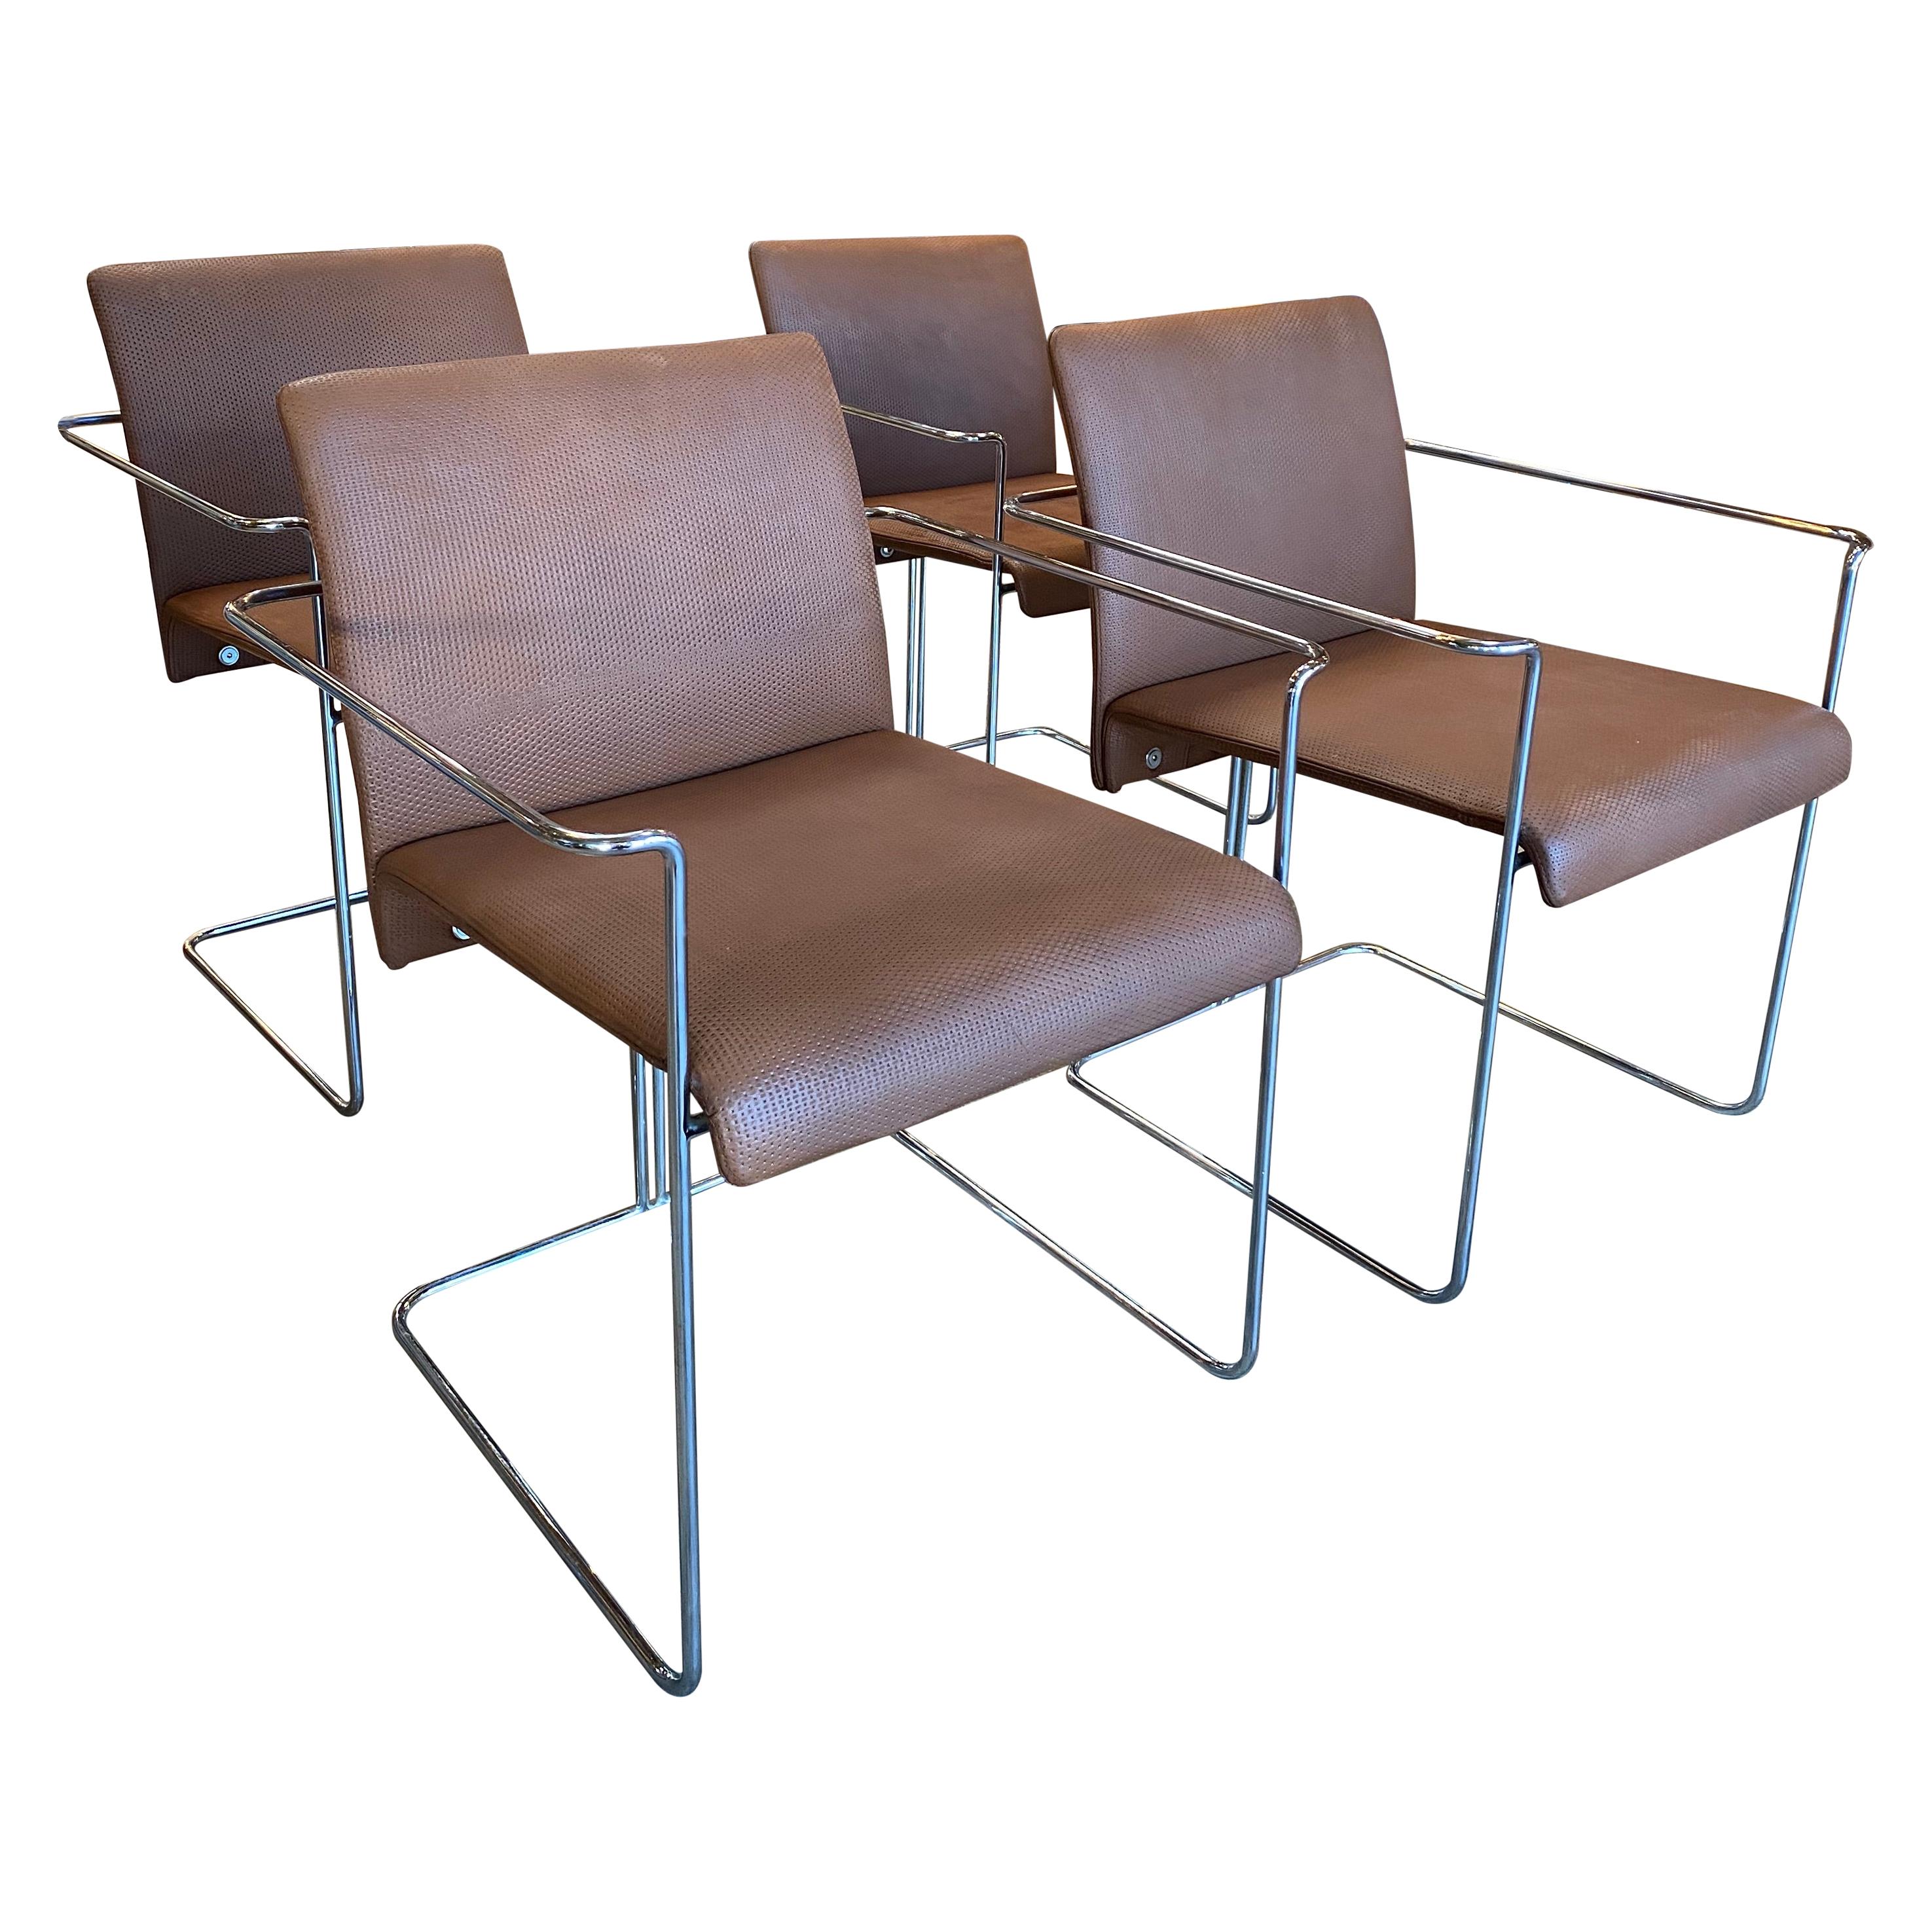 Set of 4 Dining Chairs Leather and Chrome by F.ll Saporiti, 1970s For Sale